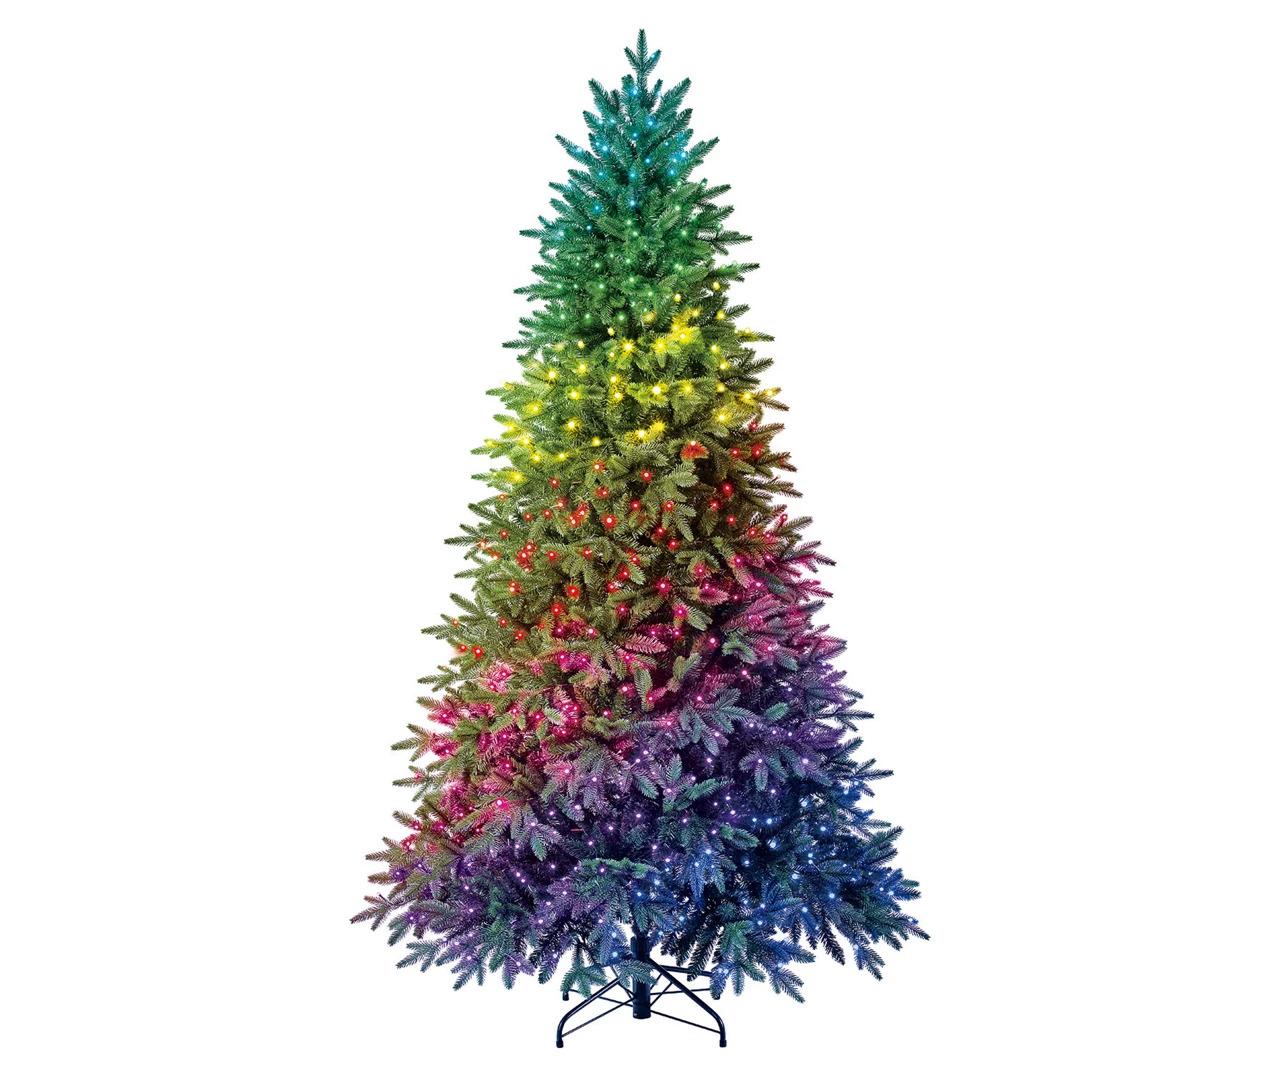 Twinkly Pre-Lit LED Artificial Christmas Tree for $223.99 Shipped